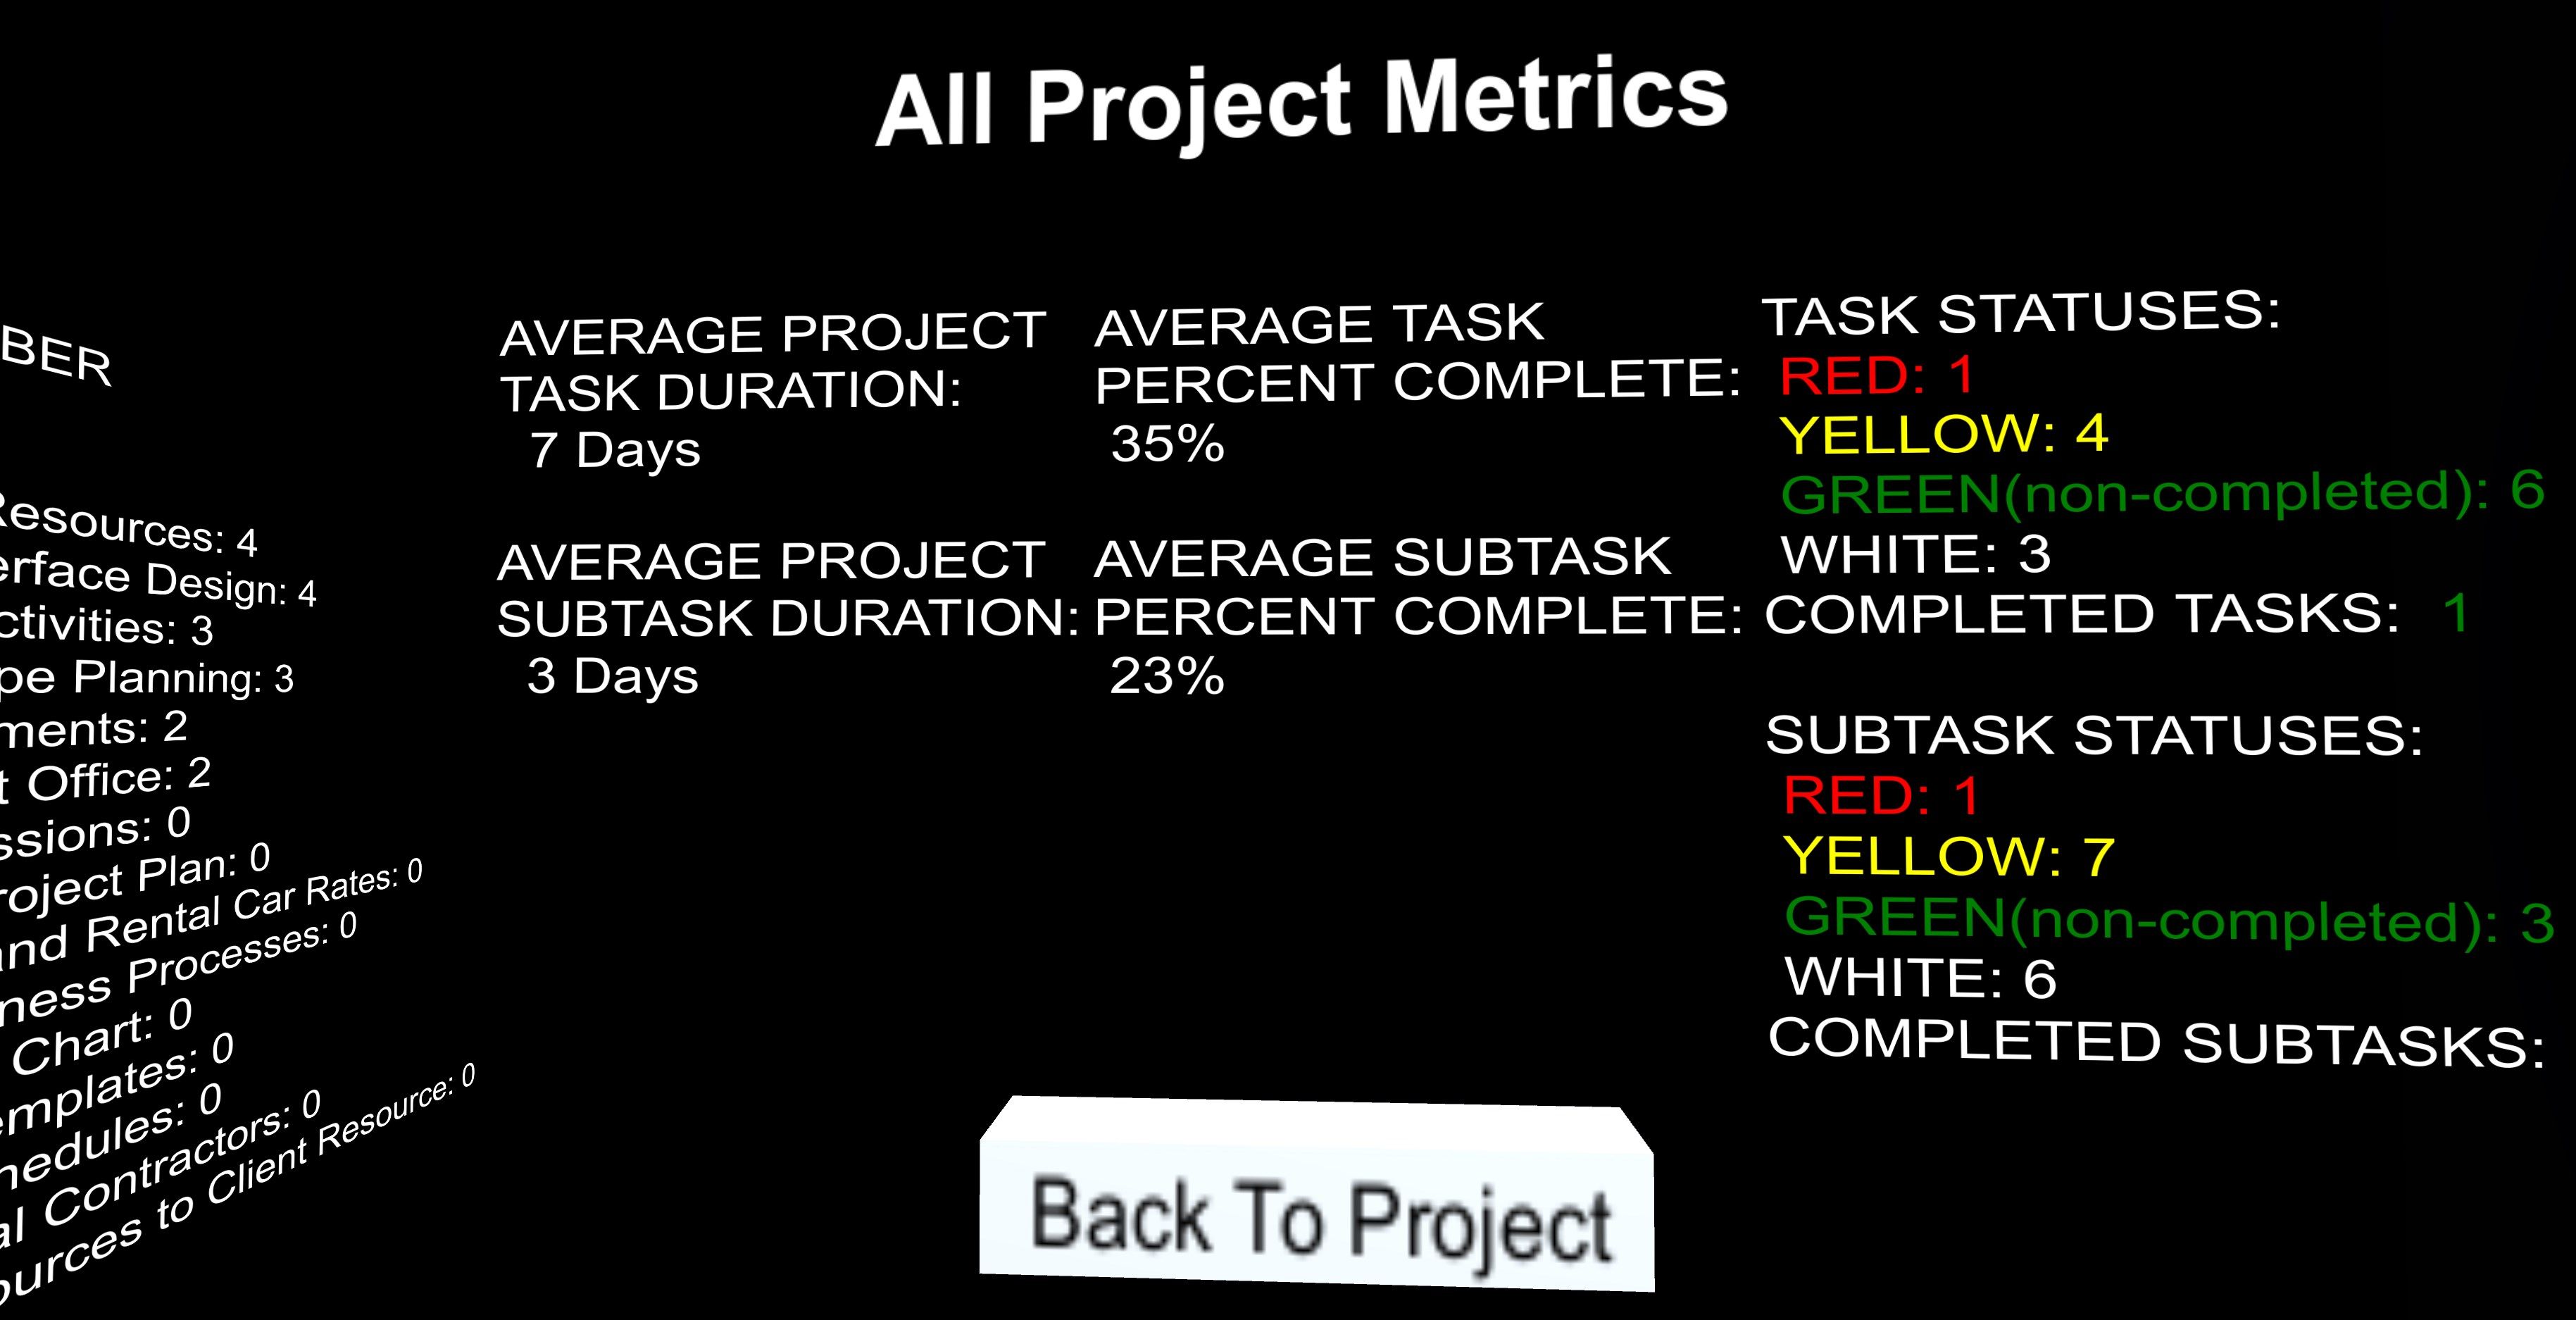 Project metrics are displayed in their own room.  Individual metrics for tasks, subtasks, and resources.